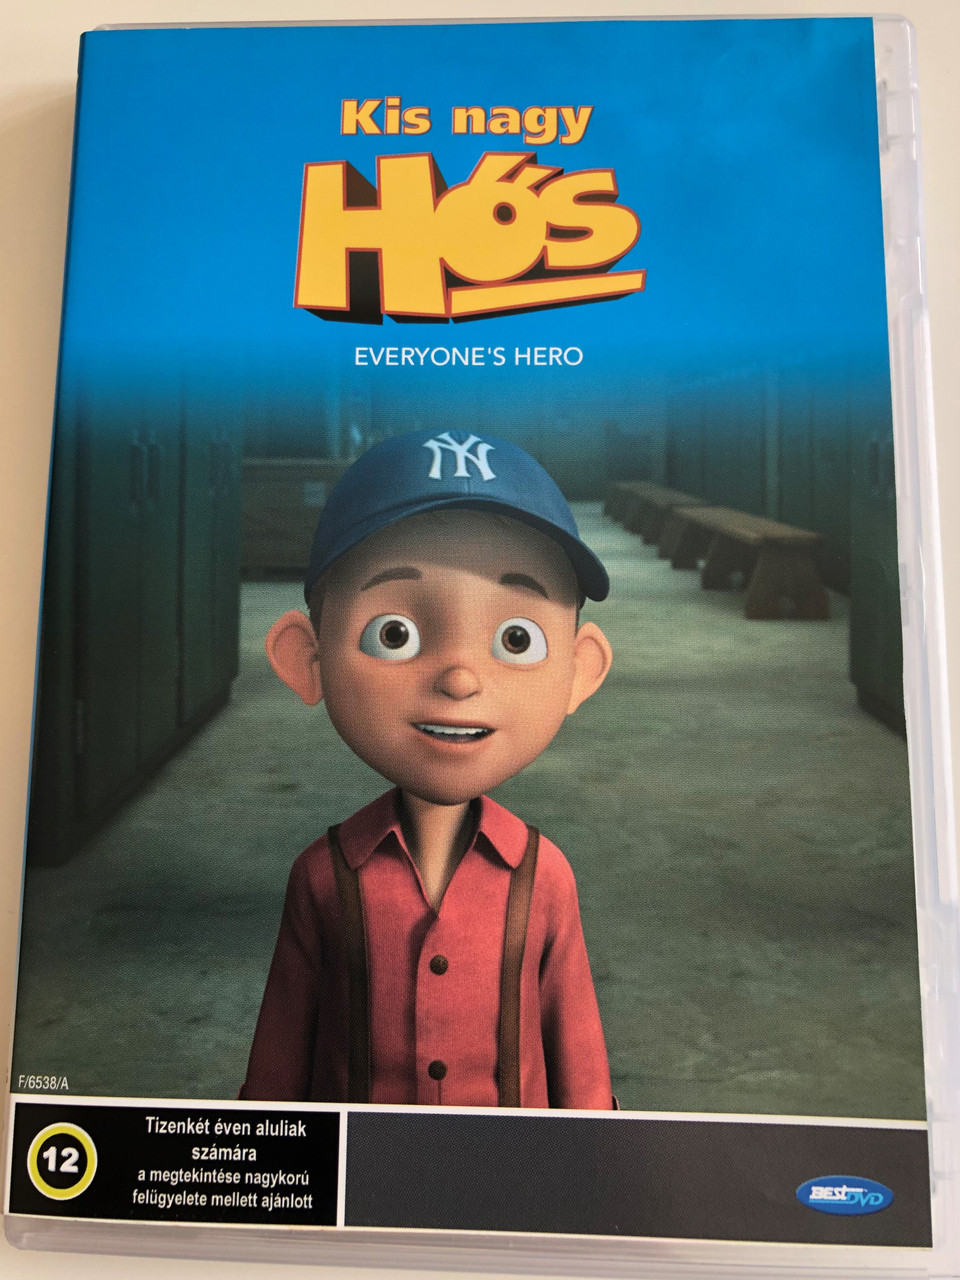 Everyone's Hero DVD 2006 Kis nagy hős / Directed by Christopher Reeve /  Starring: Jake T. Austin, Rob Reiner, William H. Macy, Brian Dennehy,  Raven-Symoné - Bible in My Language